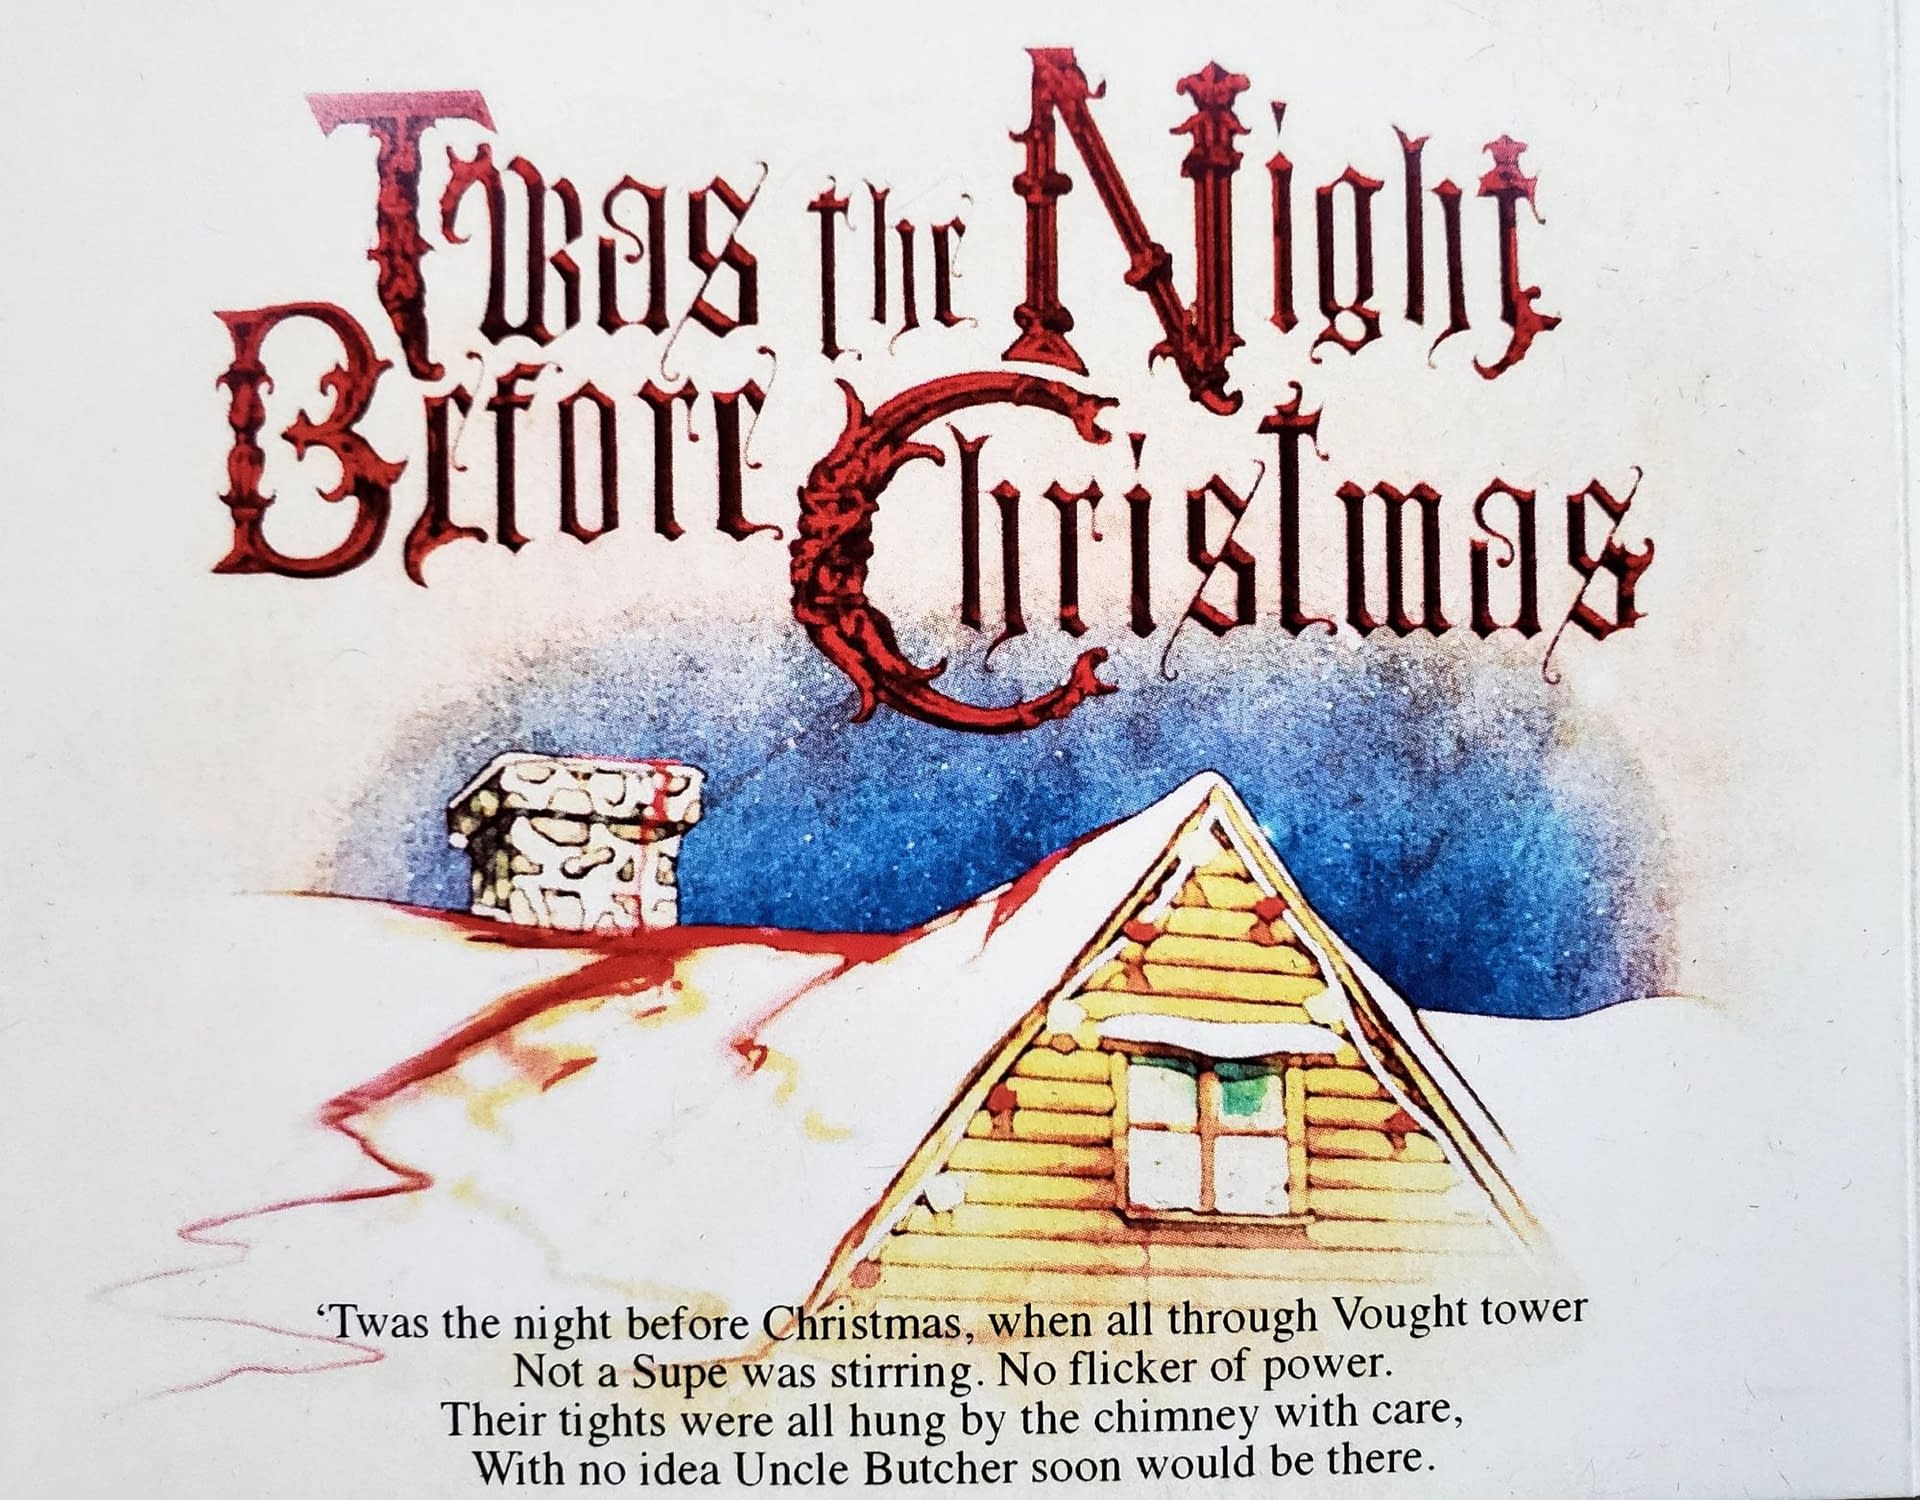 "The Boys": Butcher's Twisted "Twas the Night Before Christmas" Take Leaves The Seven's Stockings Filled with Coal [IMAGES]